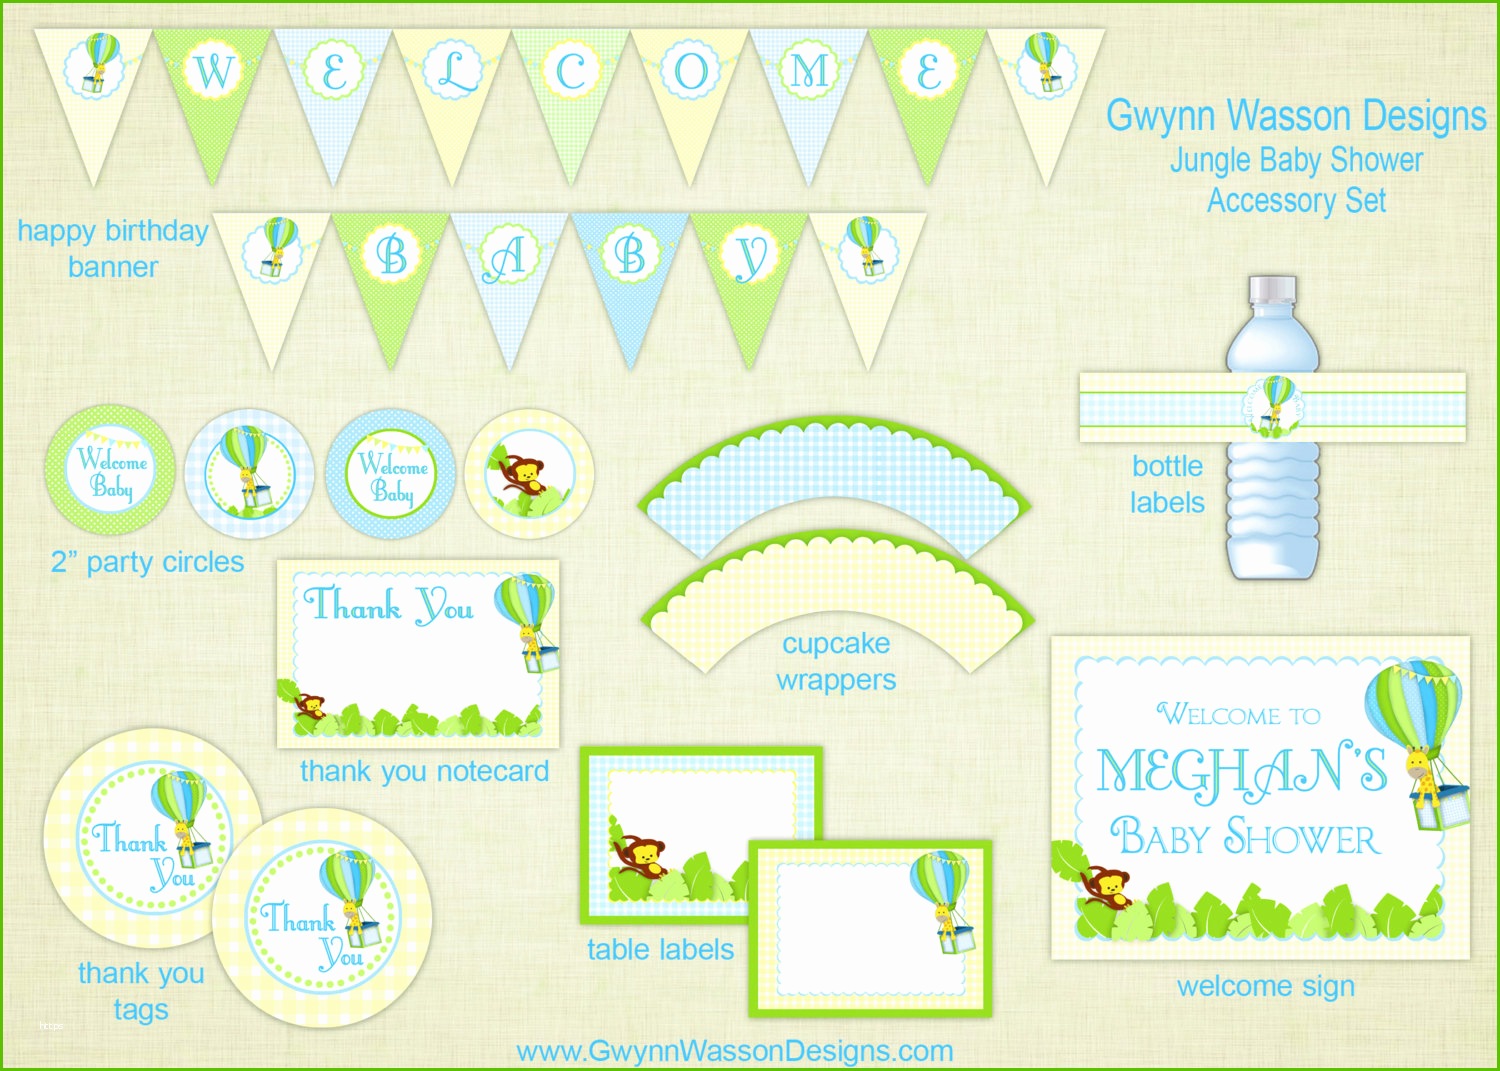 Full Size of Baby Shower:89+ Indulging Baby Shower Banner Picture Inspirations Baby Shower Hairstyles With Modern Baby Shower Plus Baby Shower Venues Near Me Together With My Baby Shower